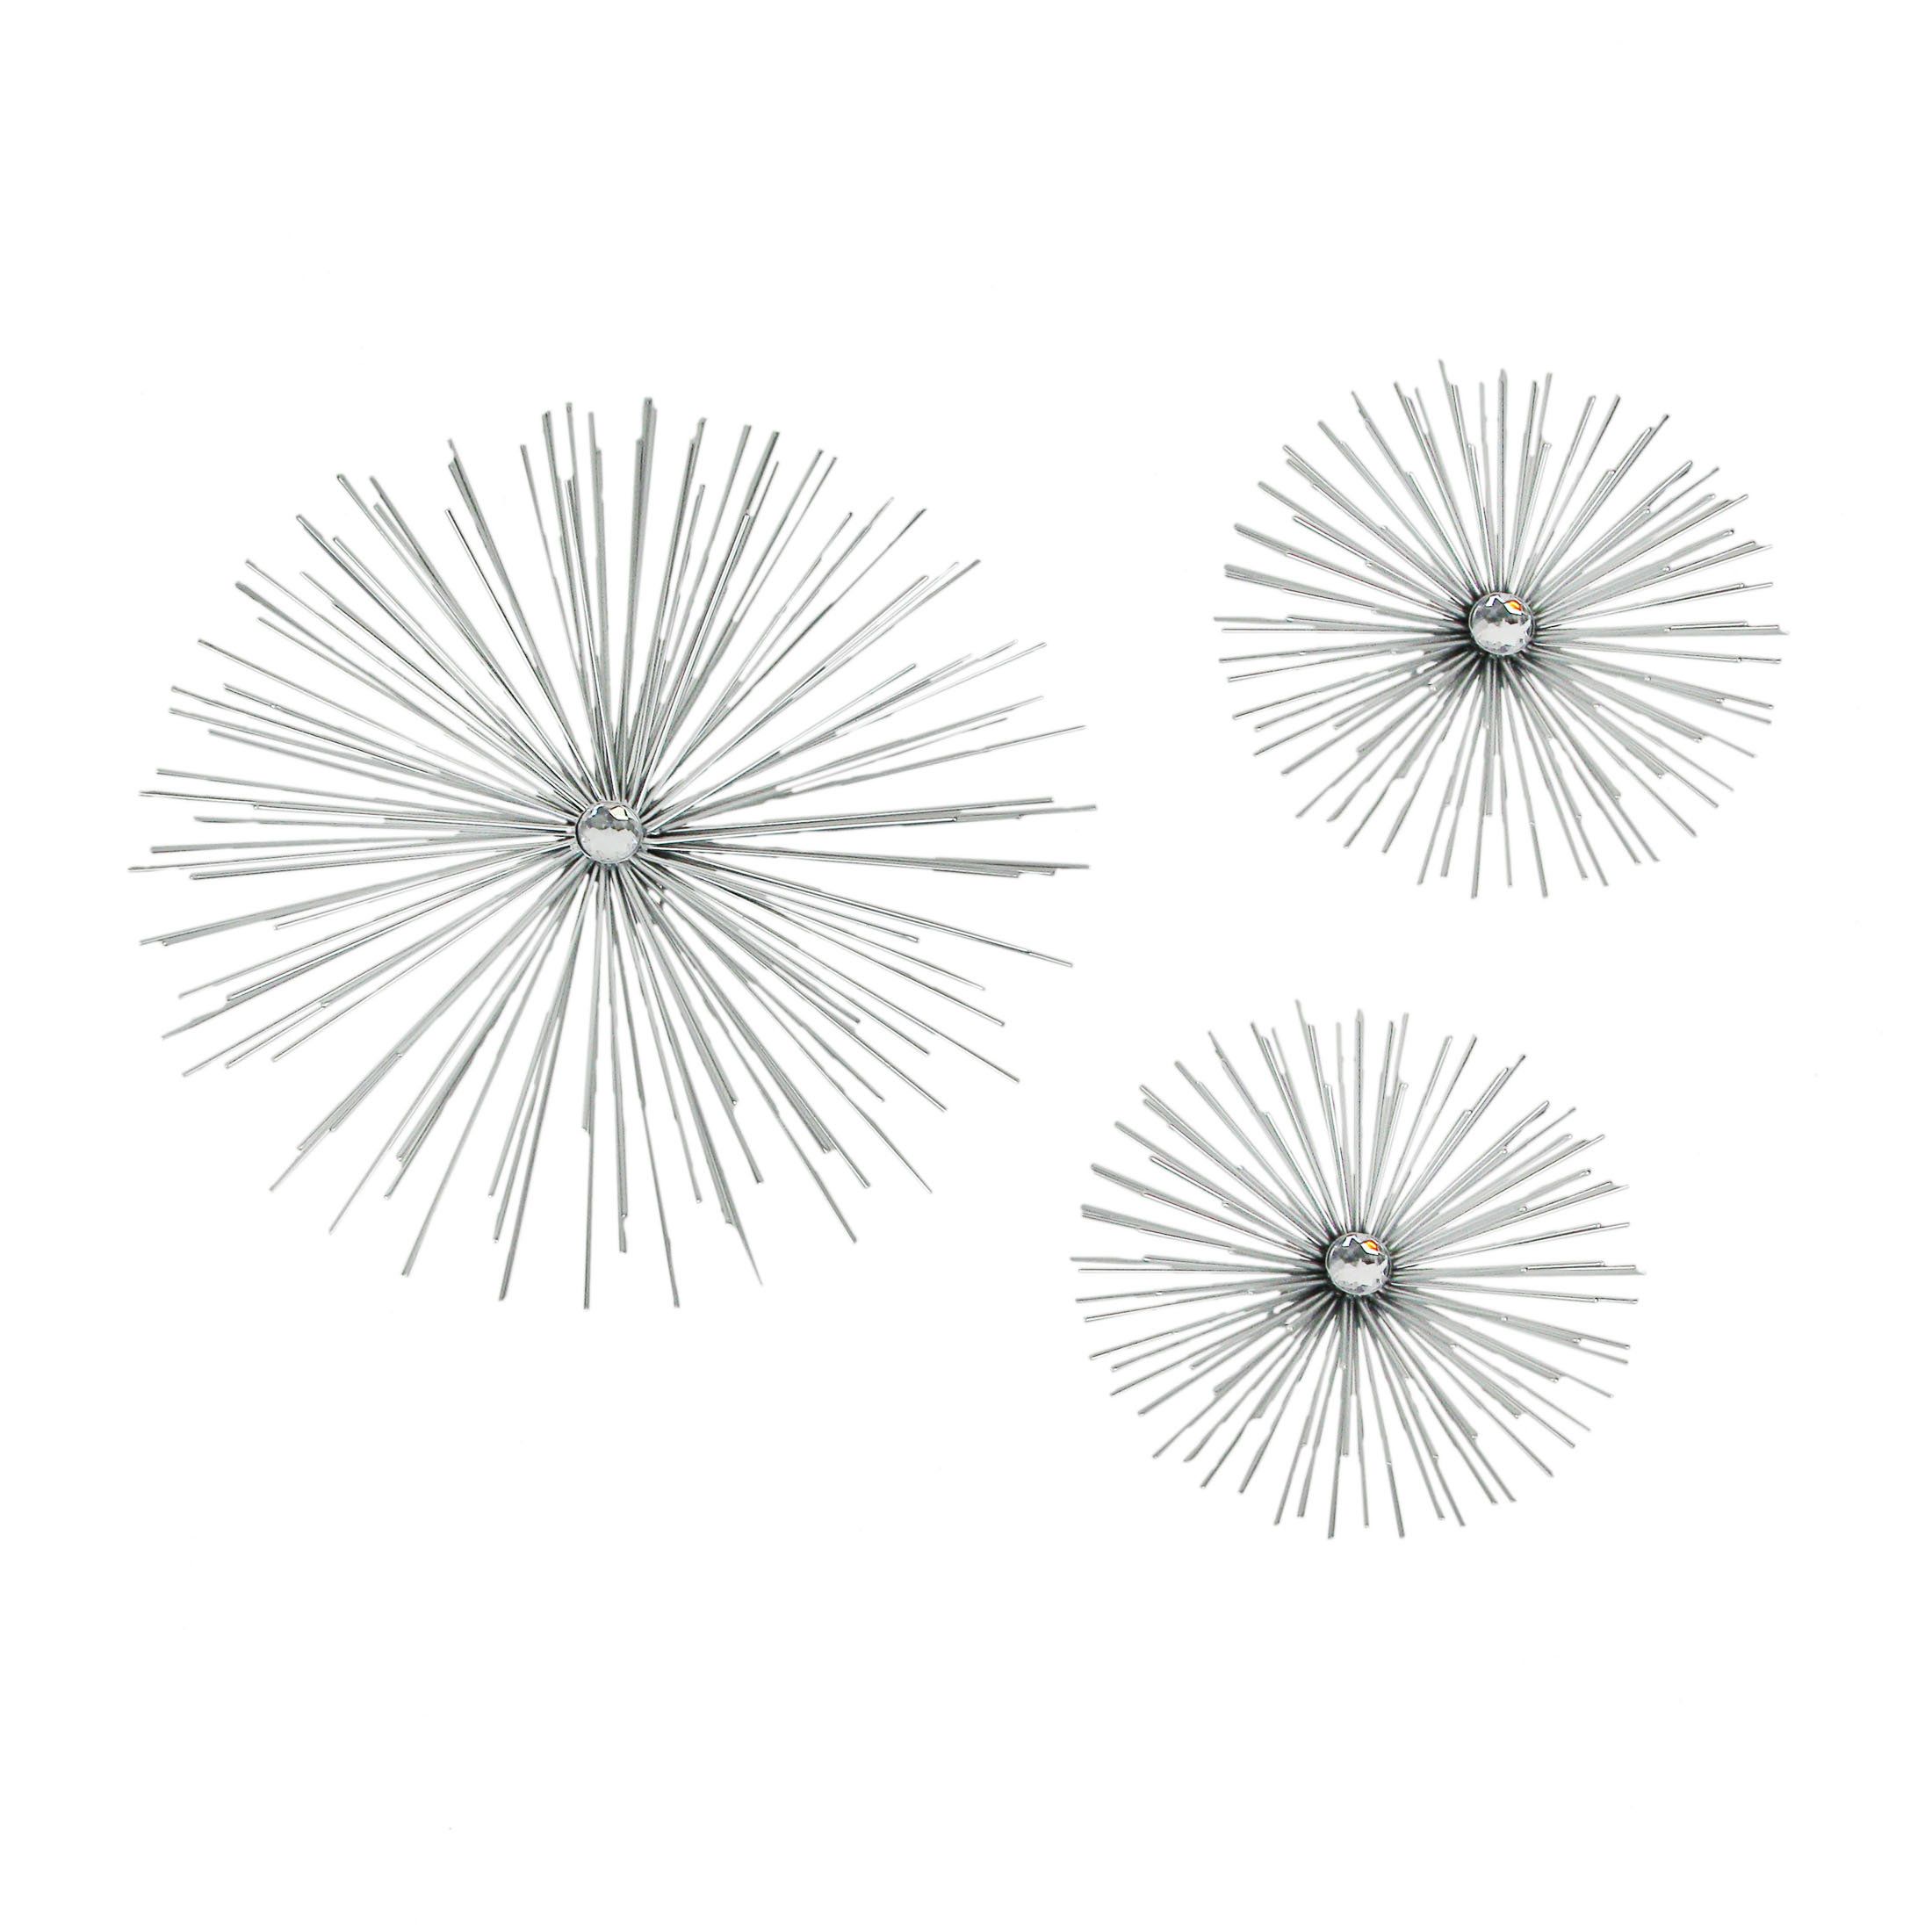 Everly Quinn 3 Piece Metal Jeweled Starburst Wall Décor Set | Wayfair With Recent Starburst Jeweled Hanging Wall Art (View 5 of 20)